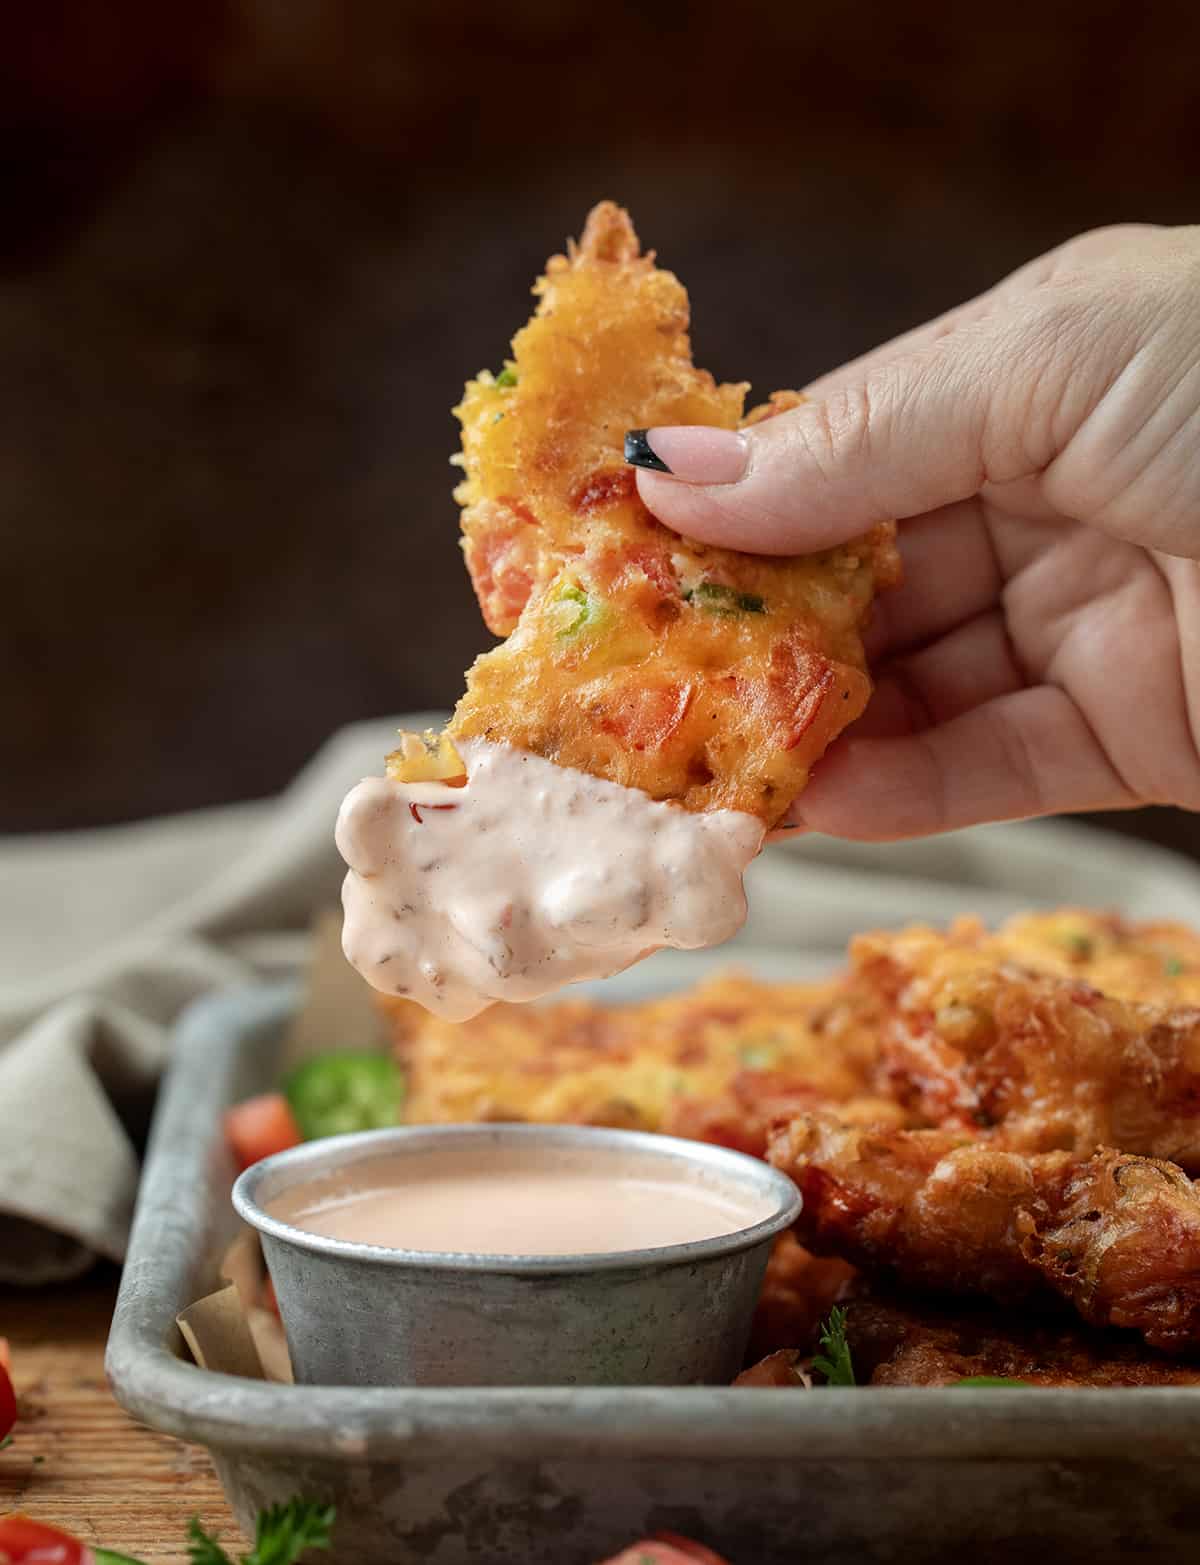 Hand Holding a Cut in Half Tomato Fritter and Dipping it into Tomato Mayo.